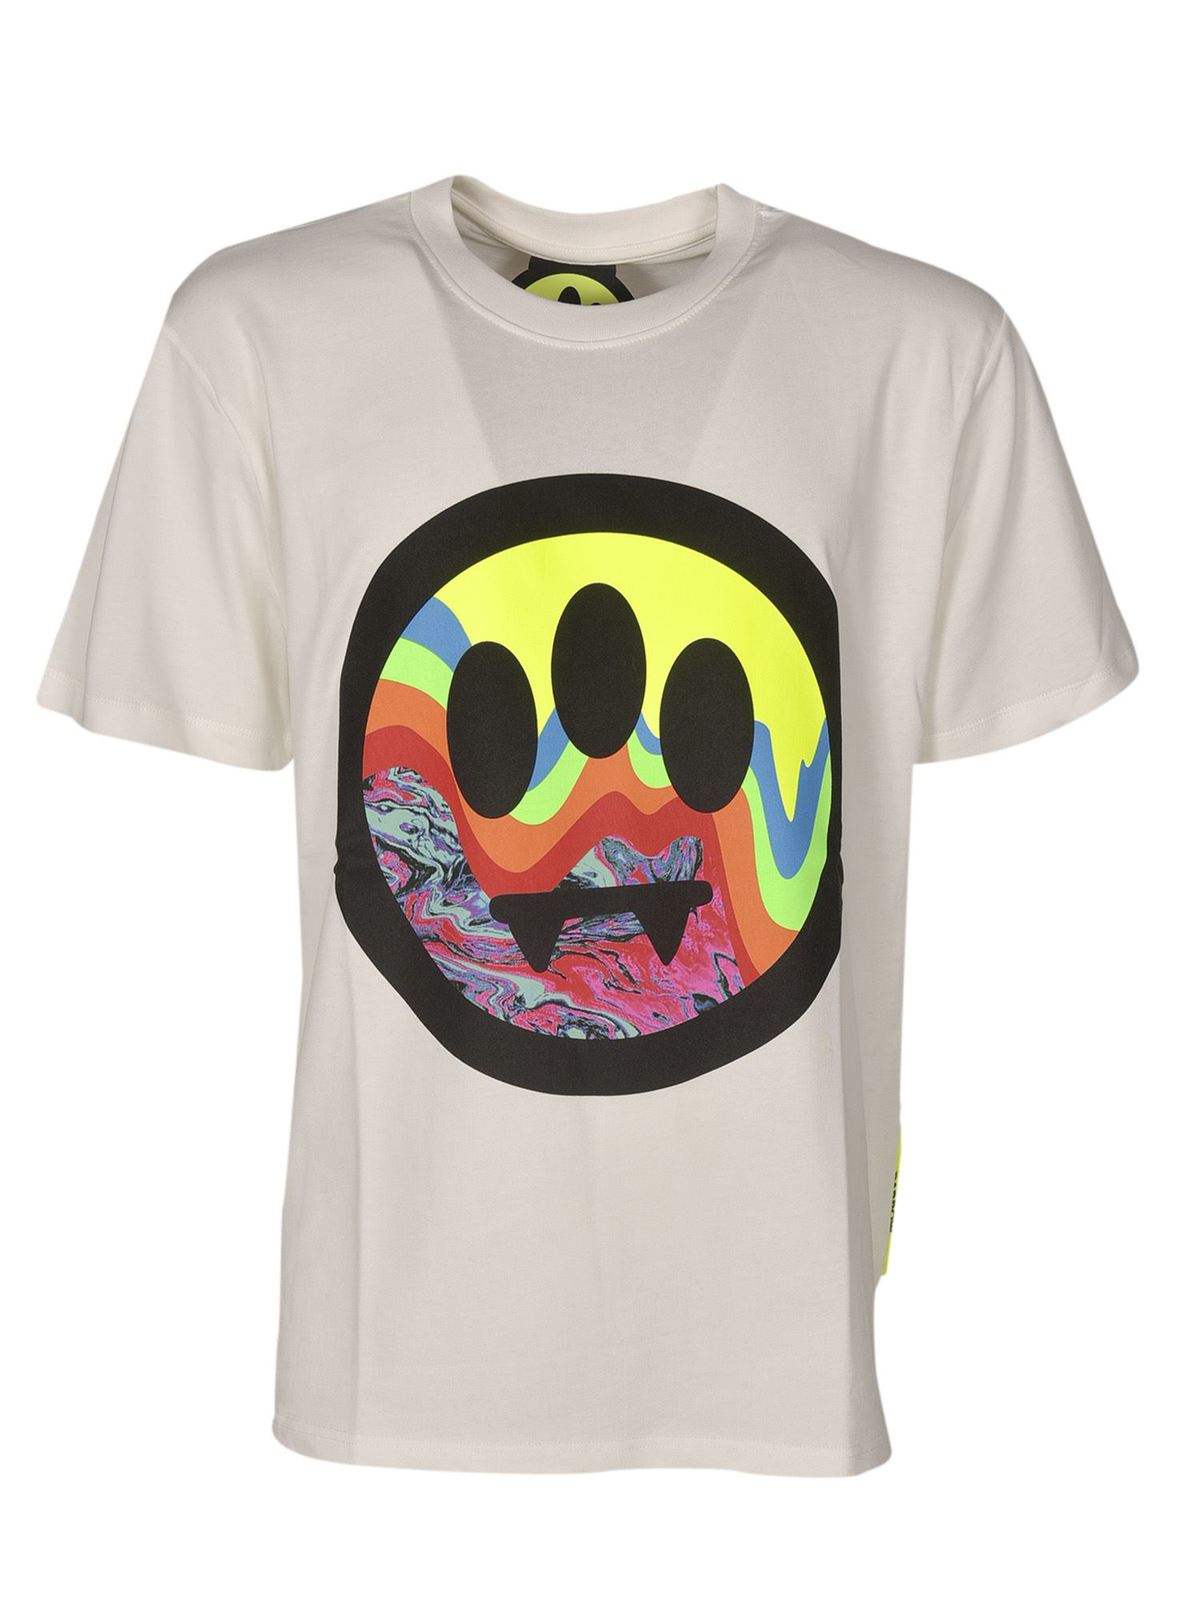 BARROW MULTICOLOR FRONT LOGO T-SHIRT IN WHITE